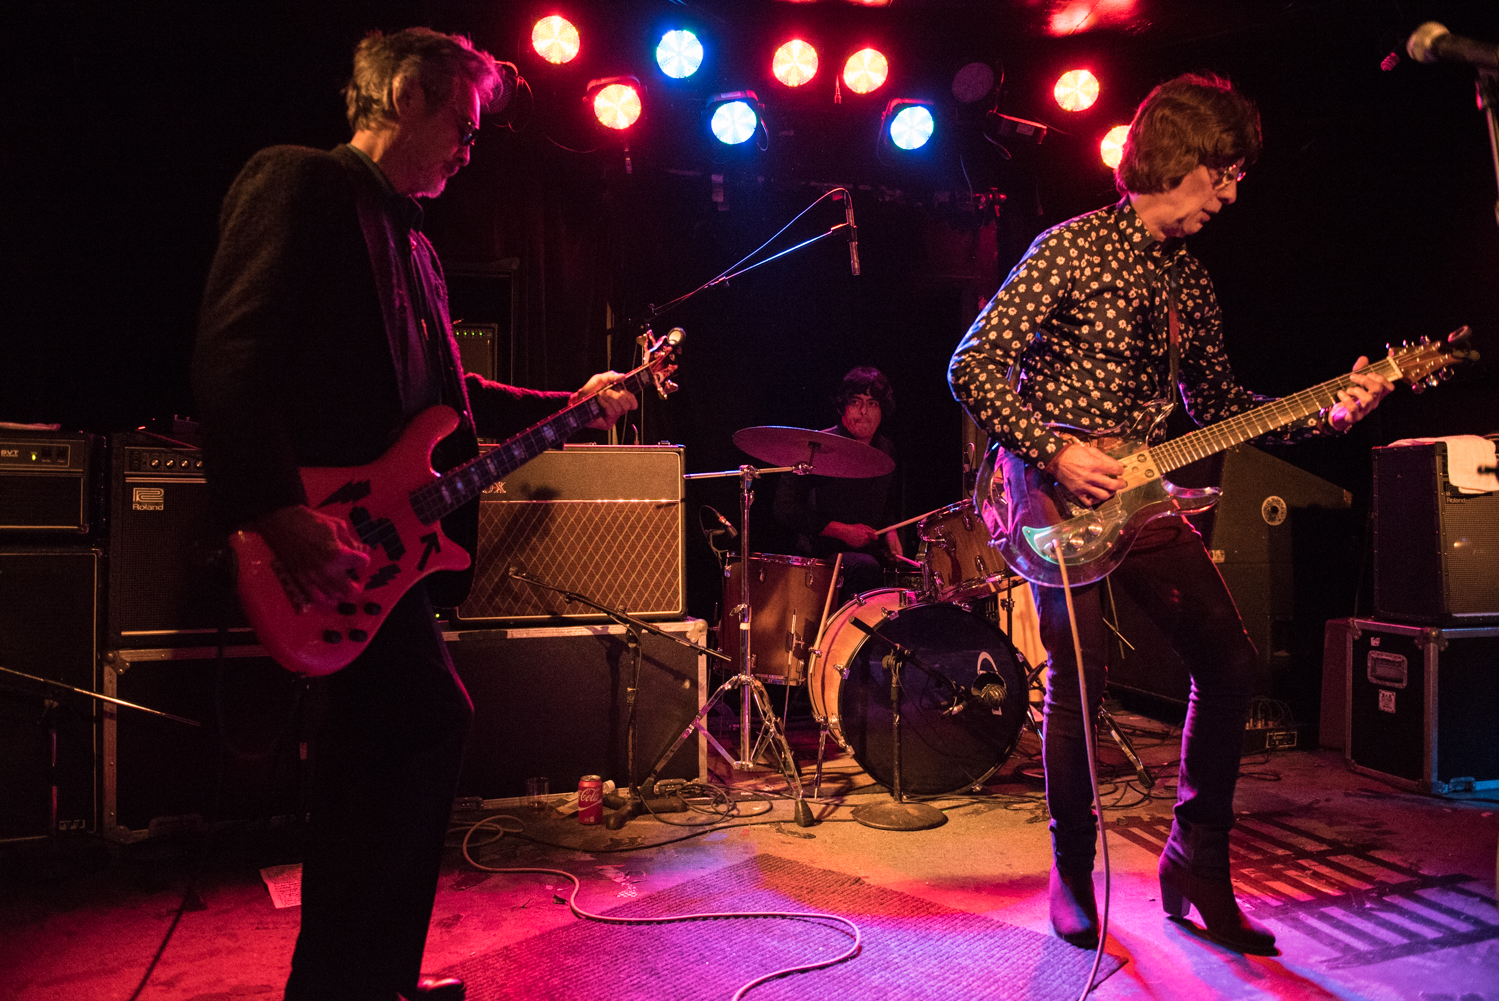 Power Pop Bill at Beat Kitchen Shakes The Walls With SF Band The Flamin’ Groovies